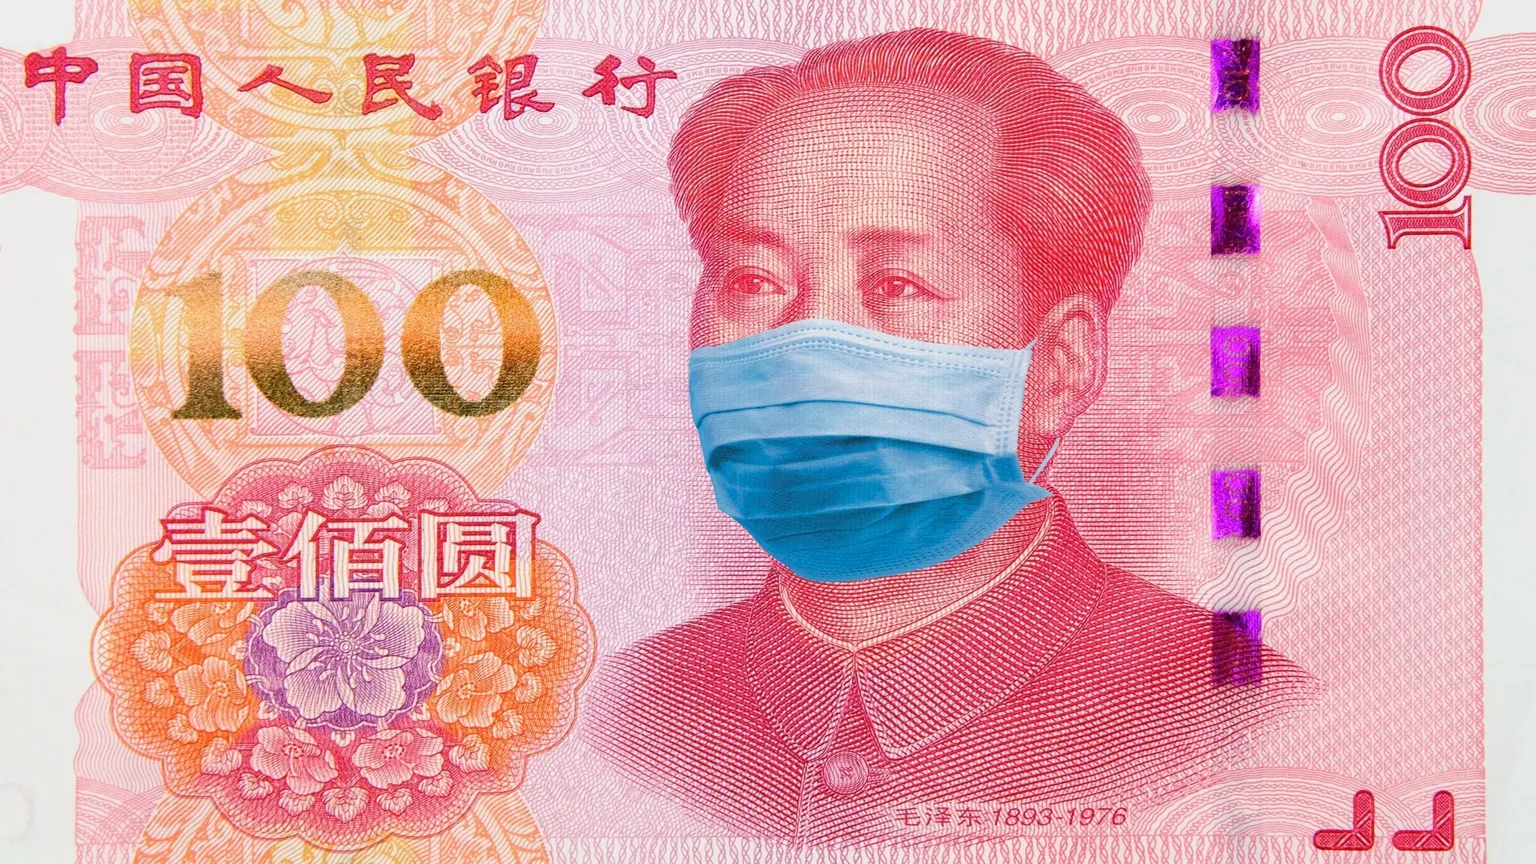 Supplies of face masks have run out in Wuhan and other stricken Chinese cities. IMAGE: Shutterstock